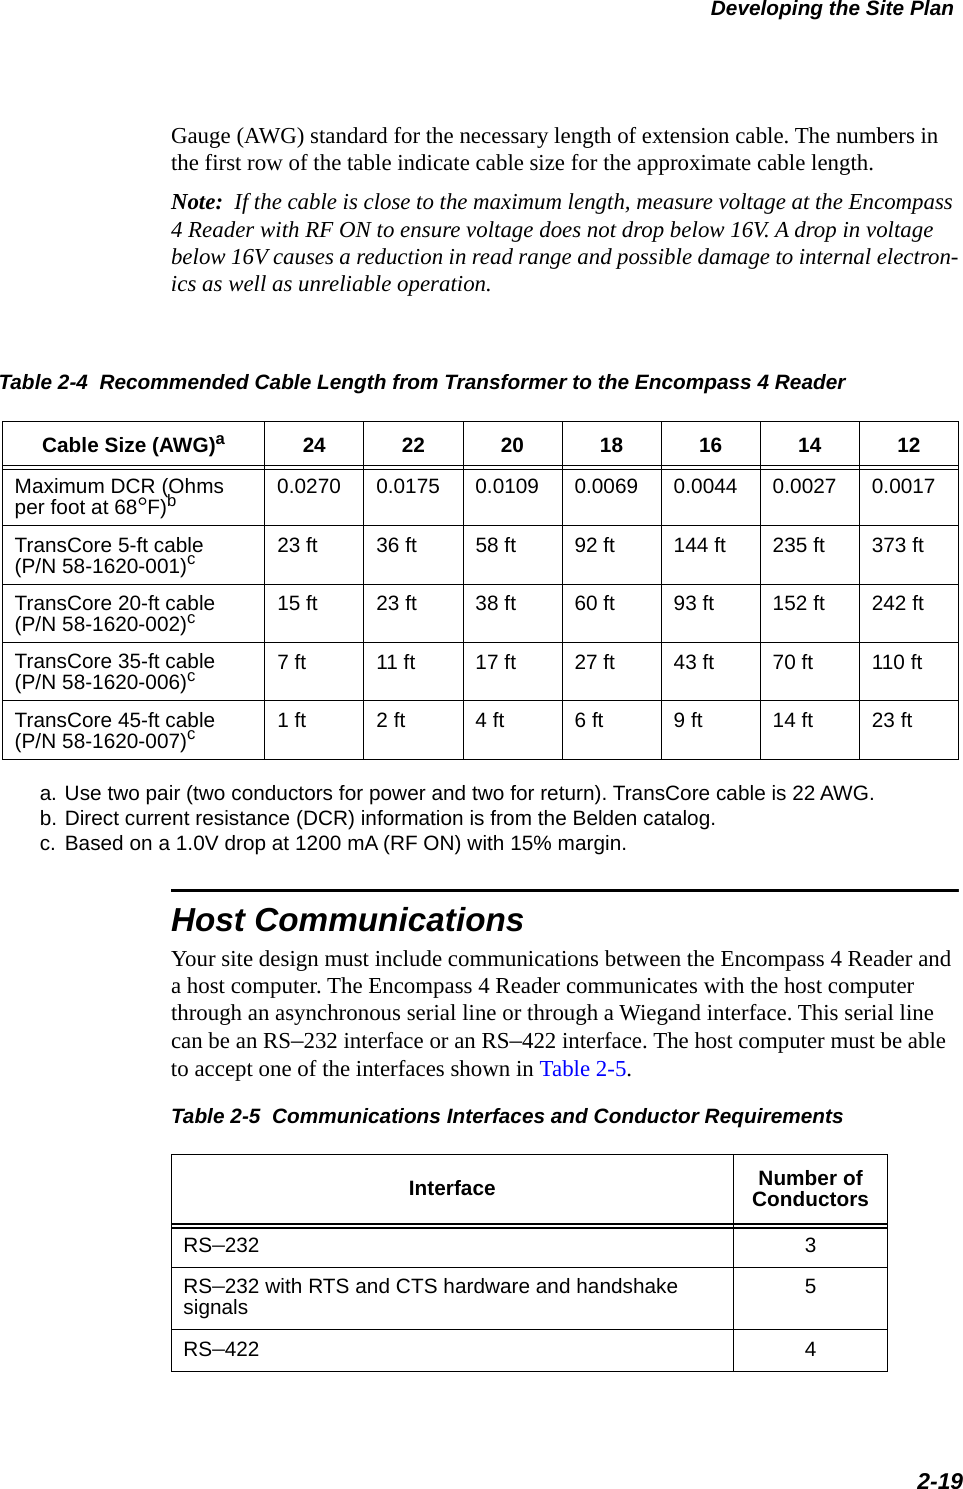 Developing the Site Plan2-19Gauge (AWG) standard for the necessary length of extension cable. The numbers in the first row of the table indicate cable size for the approximate cable length.Note:  If the cable is close to the maximum length, measure voltage at the Encompass 4 Reader with RF ON to ensure voltage does not drop below 16V. A drop in voltage below 16V causes a reduction in read range and possible damage to internal electron-ics as well as unreliable operation.Table 2-4  Recommended Cable Length from Transformer to the Encompass 4 Reader Cable Size (AWG)a24 22 20 18 16 14 12Maximum DCR (Ohms per foot at 68°F)bb. Direct current resistance (DCR) information is from the Belden catalog.0.0270 0.0175 0.0109 0.0069 0.0044 0.0027 0.0017TransCore 5-ft cable(P/N 58-1620-001)cc. Based on a 1.0V drop at 1200 mA (RF ON) with 15% margin.23 ft 36 ft 58 ft 92 ft 144 ft 235 ft 373 ftTransCore 20-ft cable(P/N 58-1620-002)c15 ft 23 ft 38 ft 60 ft 93 ft 152 ft 242 ftTransCore 35-ft cable(P/N 58-1620-006)c7 ft 11 ft 17 ft 27 ft 43 ft 70 ft 110 ftTransCore 45-ft cable(P/N 58-1620-007)c1 ft 2 ft 4 ft 6 ft 9 ft 14 ft 23 ft Host CommunicationsYour site design must include communications between the Encompass 4 Reader and a host computer. The Encompass 4 Reader communicates with the host computer through an asynchronous serial line or through a Wiegand interface. This serial line can be an RS–232 interface or an RS–422 interface. The host computer must be able to accept one of the interfaces shown in Table 2-5.a. Use two pair (two conductors for power and two for return). TransCore cable is 22 AWG.Table 2-5  Communications Interfaces and Conductor Requirements  Interface Number of ConductorsRS–232 3RS–232 with RTS and CTS hardware and handshake signals 5RS–422 4